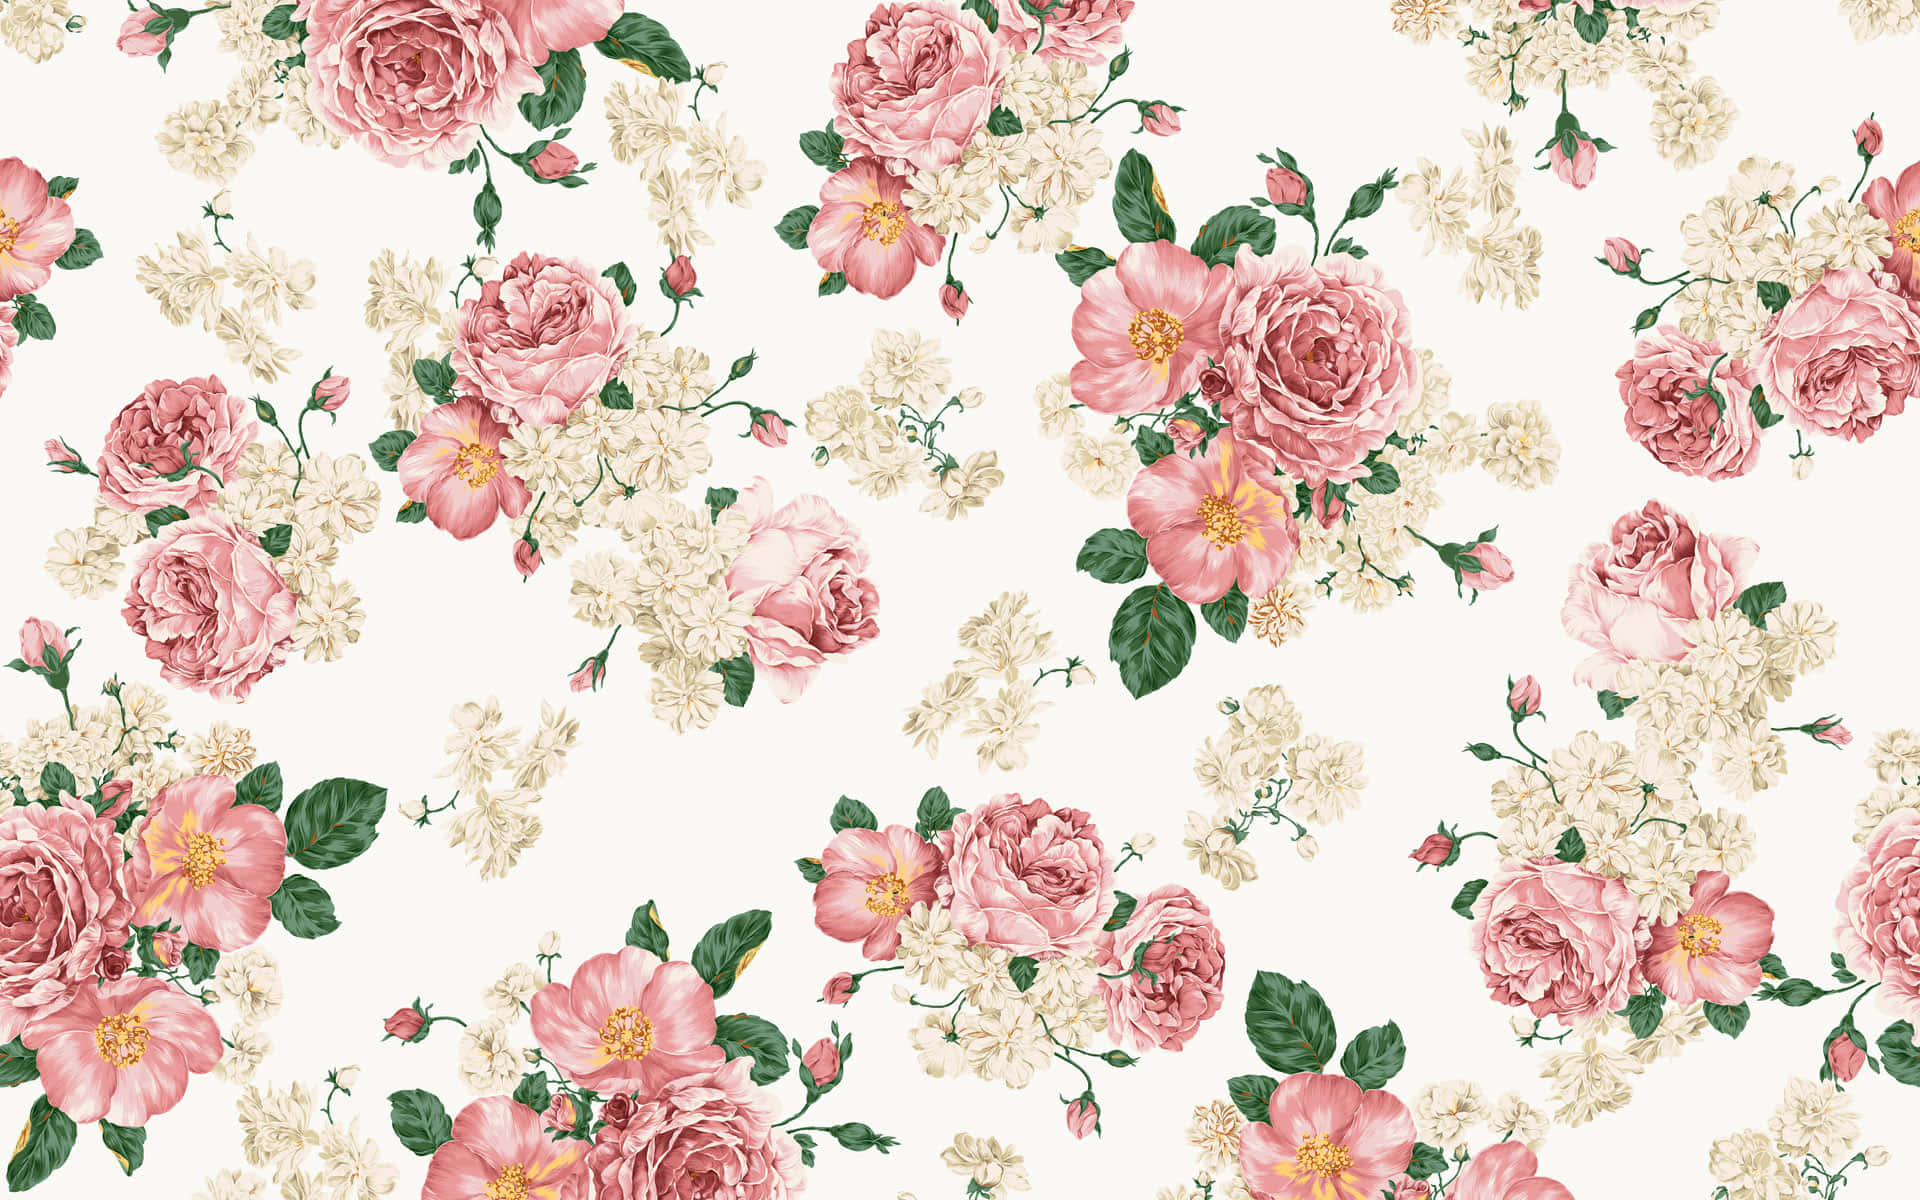 Be Inspired by the Beauty of this Floral Pattern